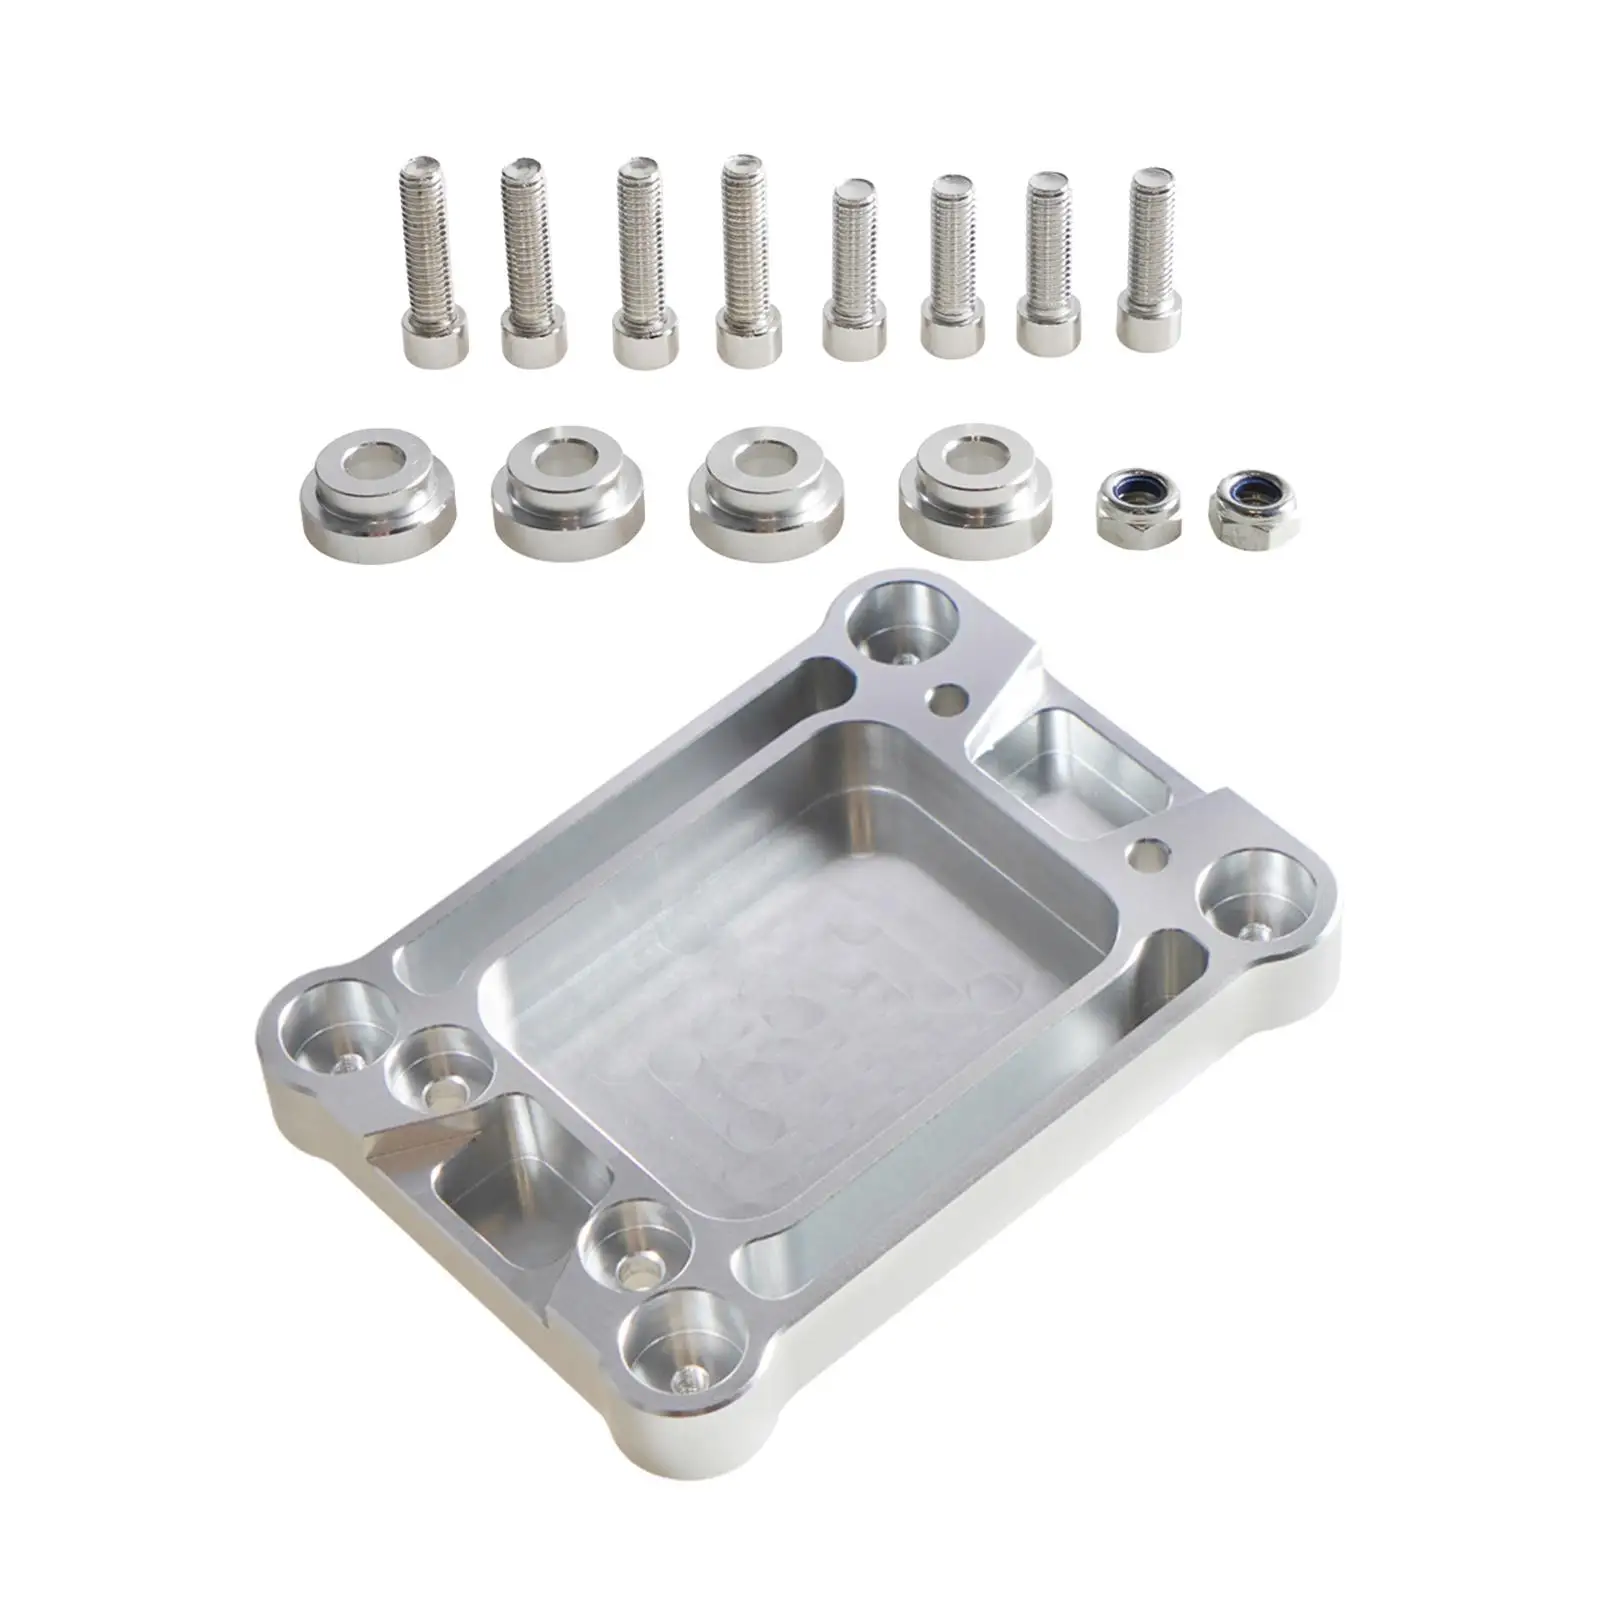 Lever Base Accessory Professional Durable Spare Parts Shifter Box Plate Adapter for 1988-2000 Integra 1994-2001